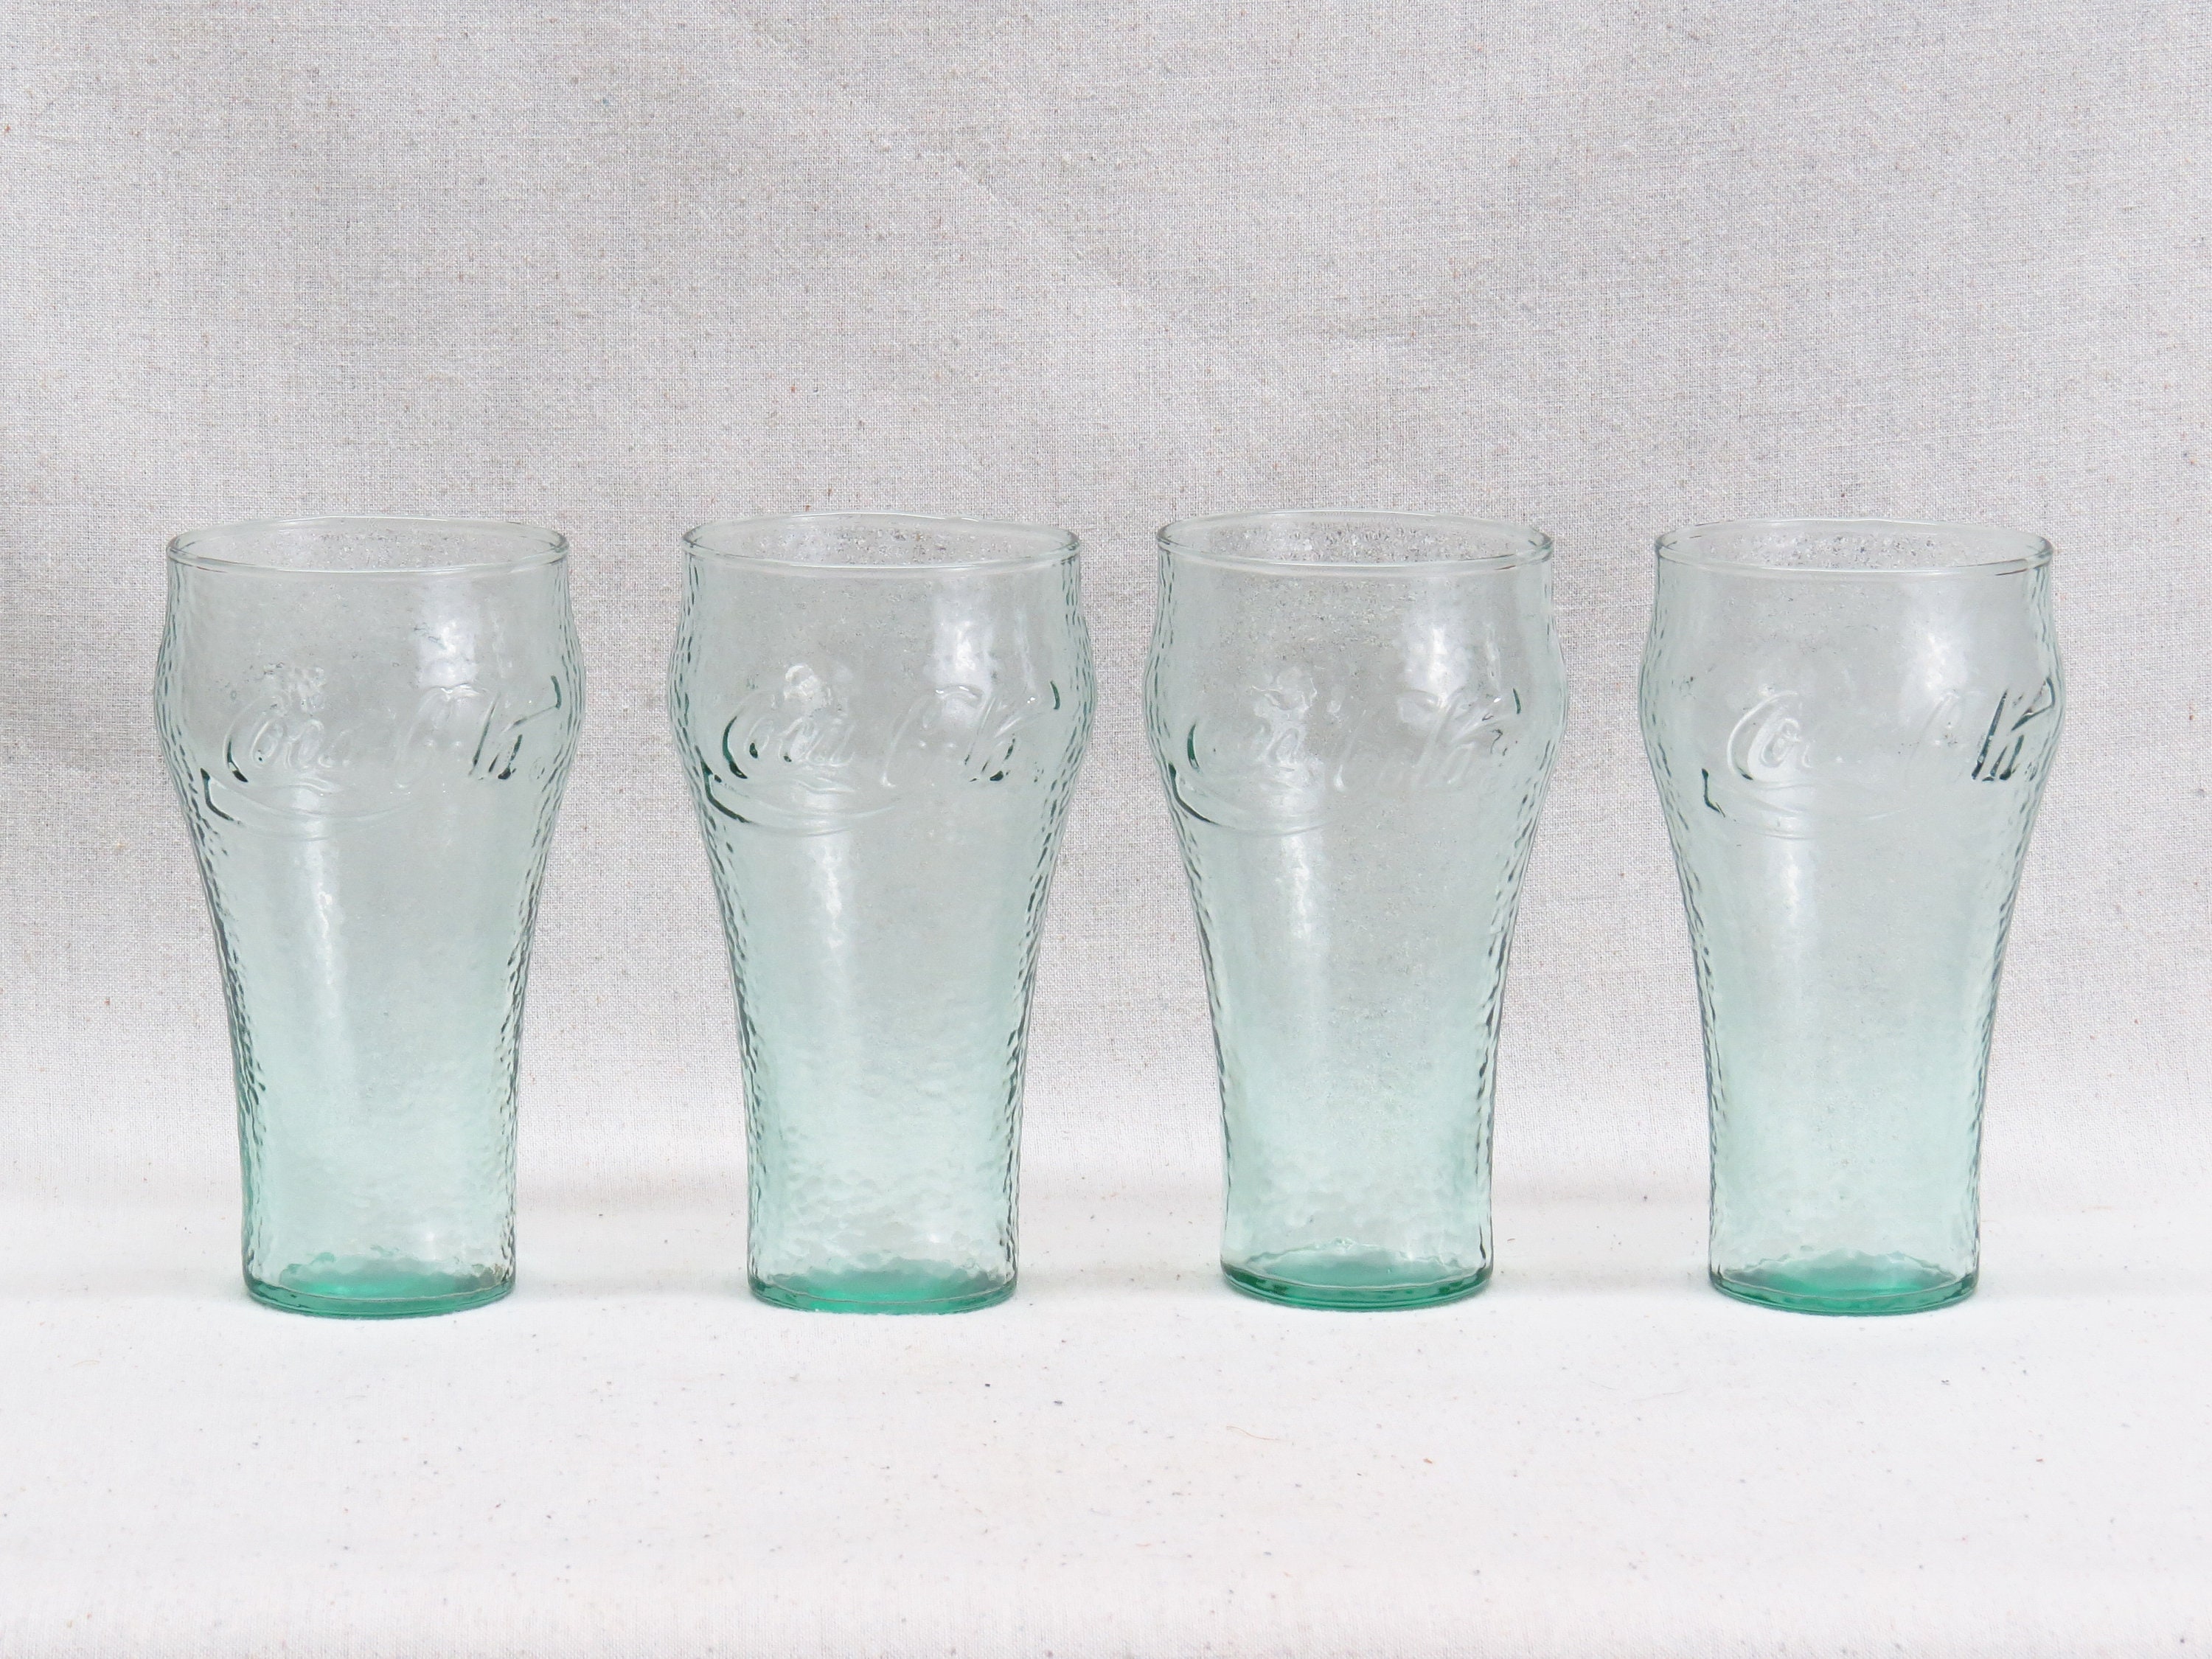 Set of Two Vintage Tinted Green Coca- Cola Glasses – Back In Time